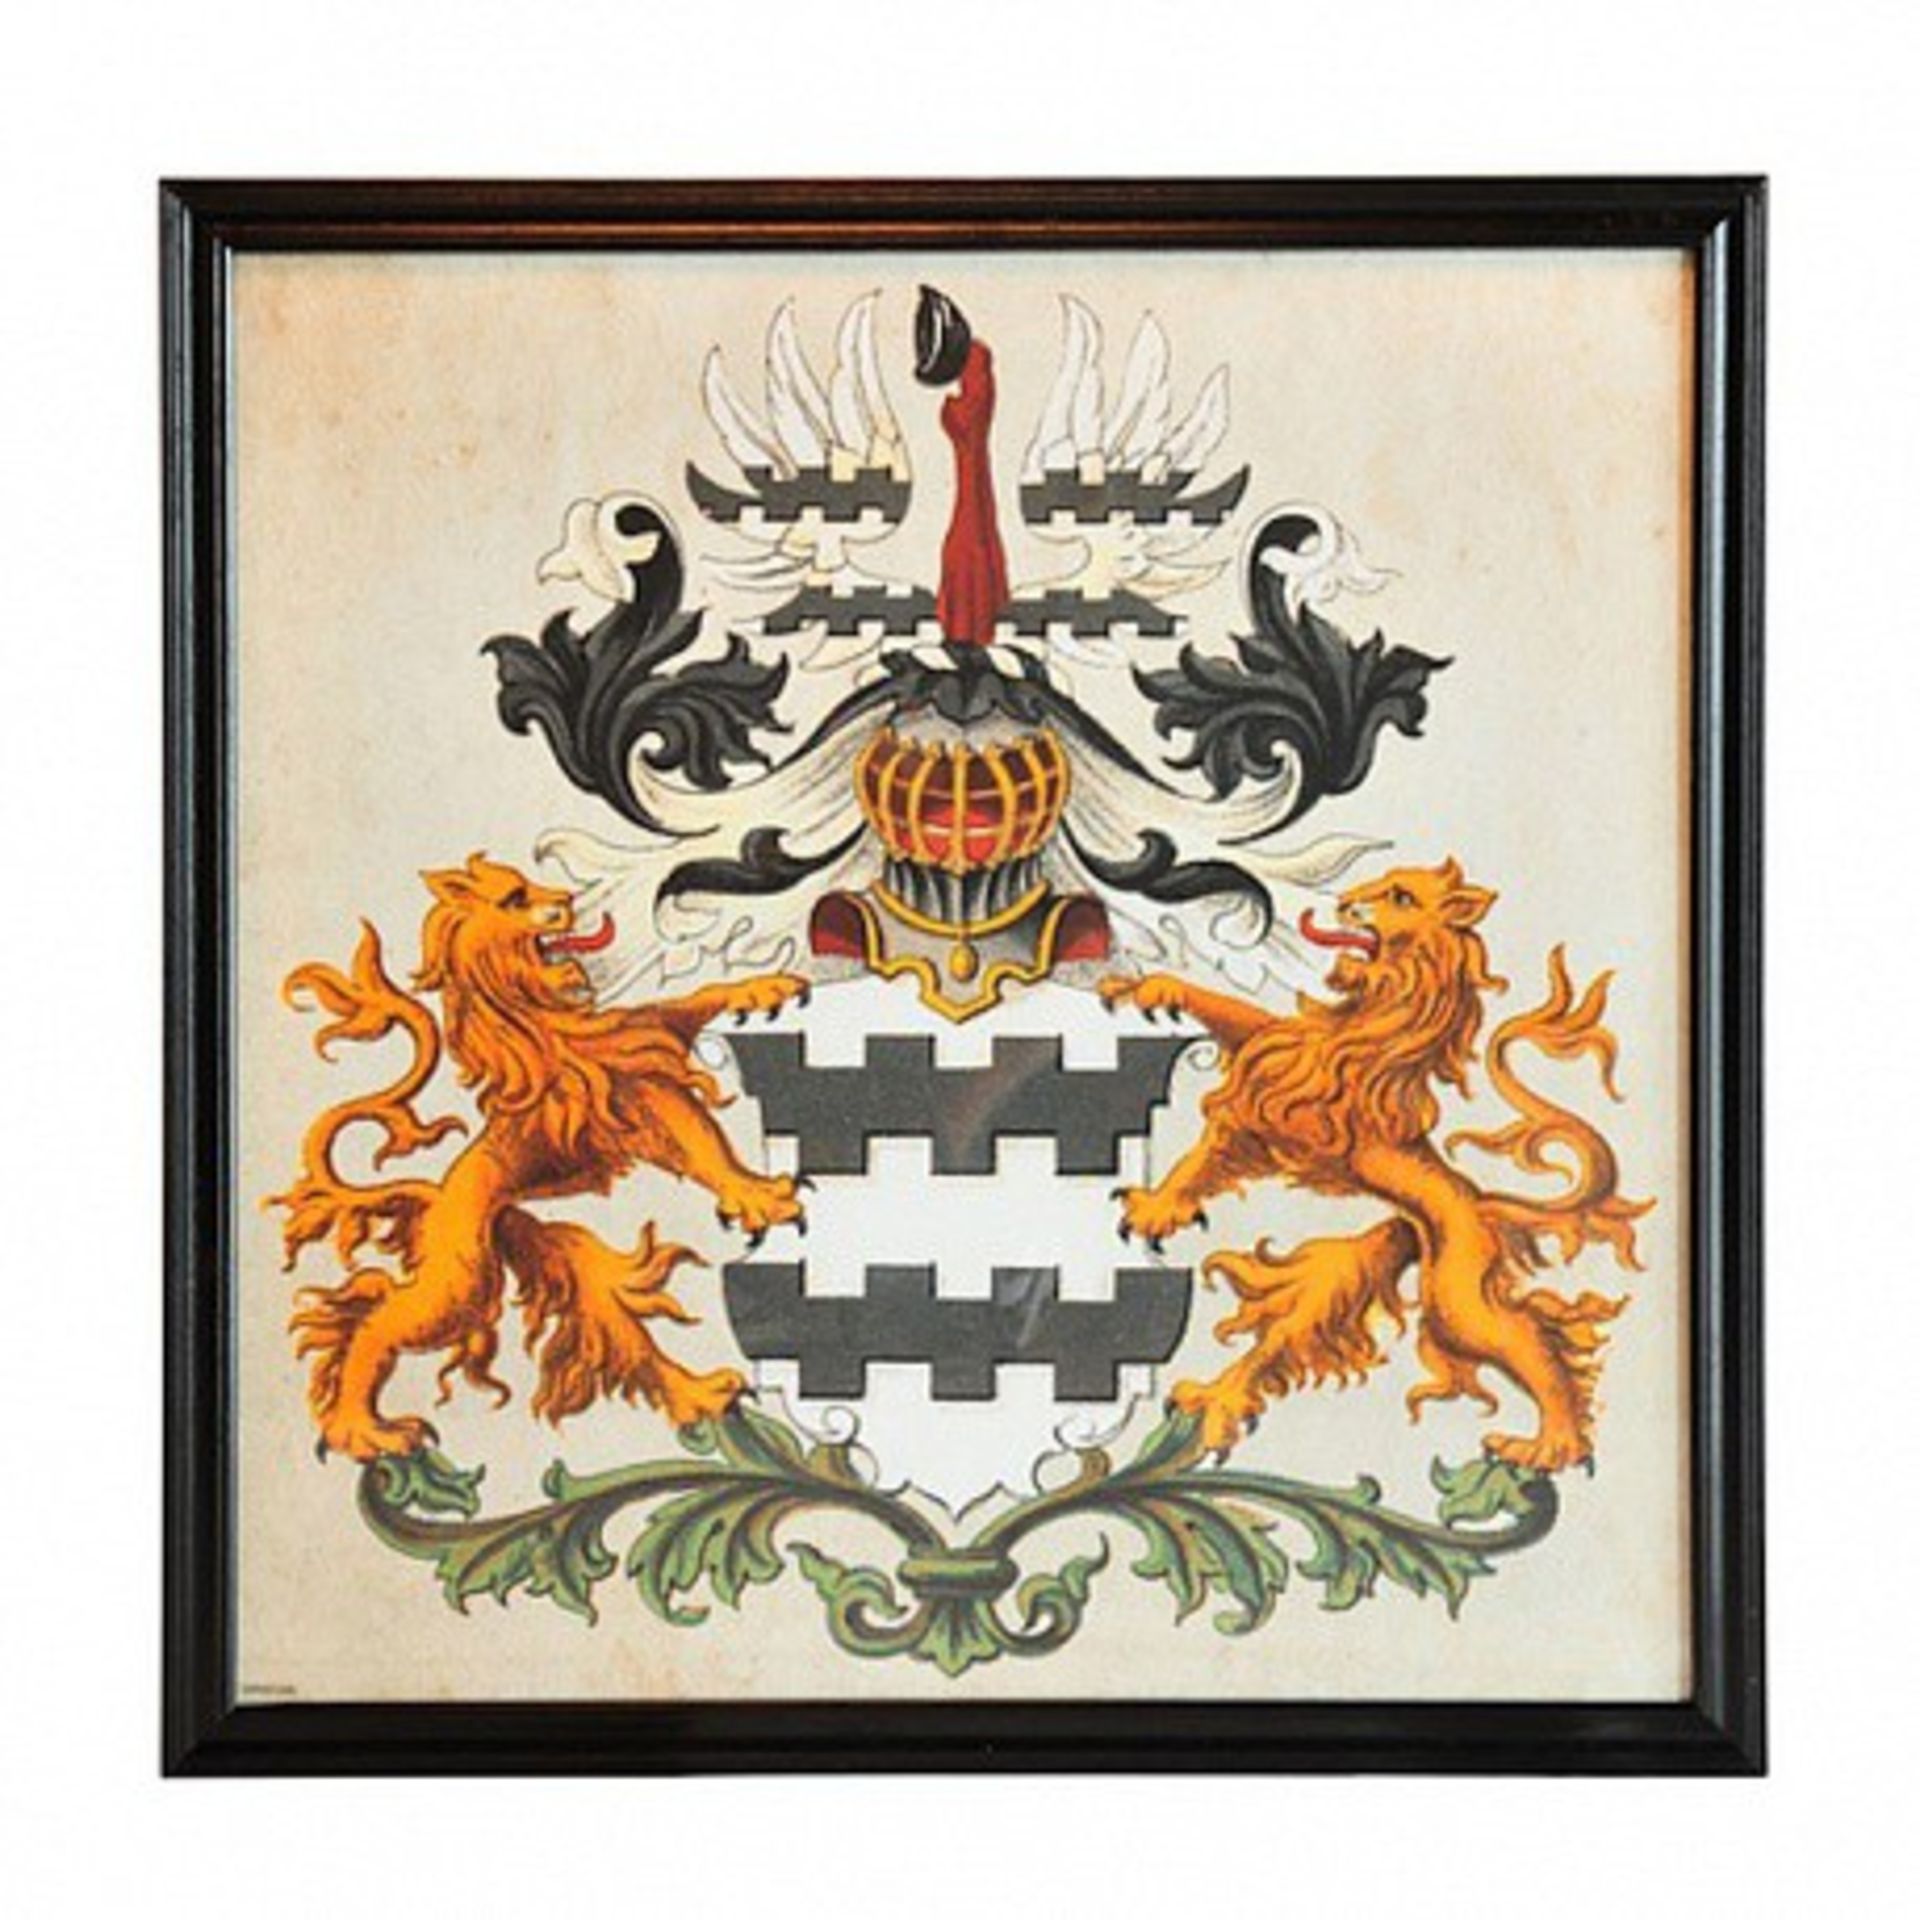 Crest Duncan 55cm Art Black Wood 55 x 3 x 55 5cm Historically-Inspired Print Sourced From